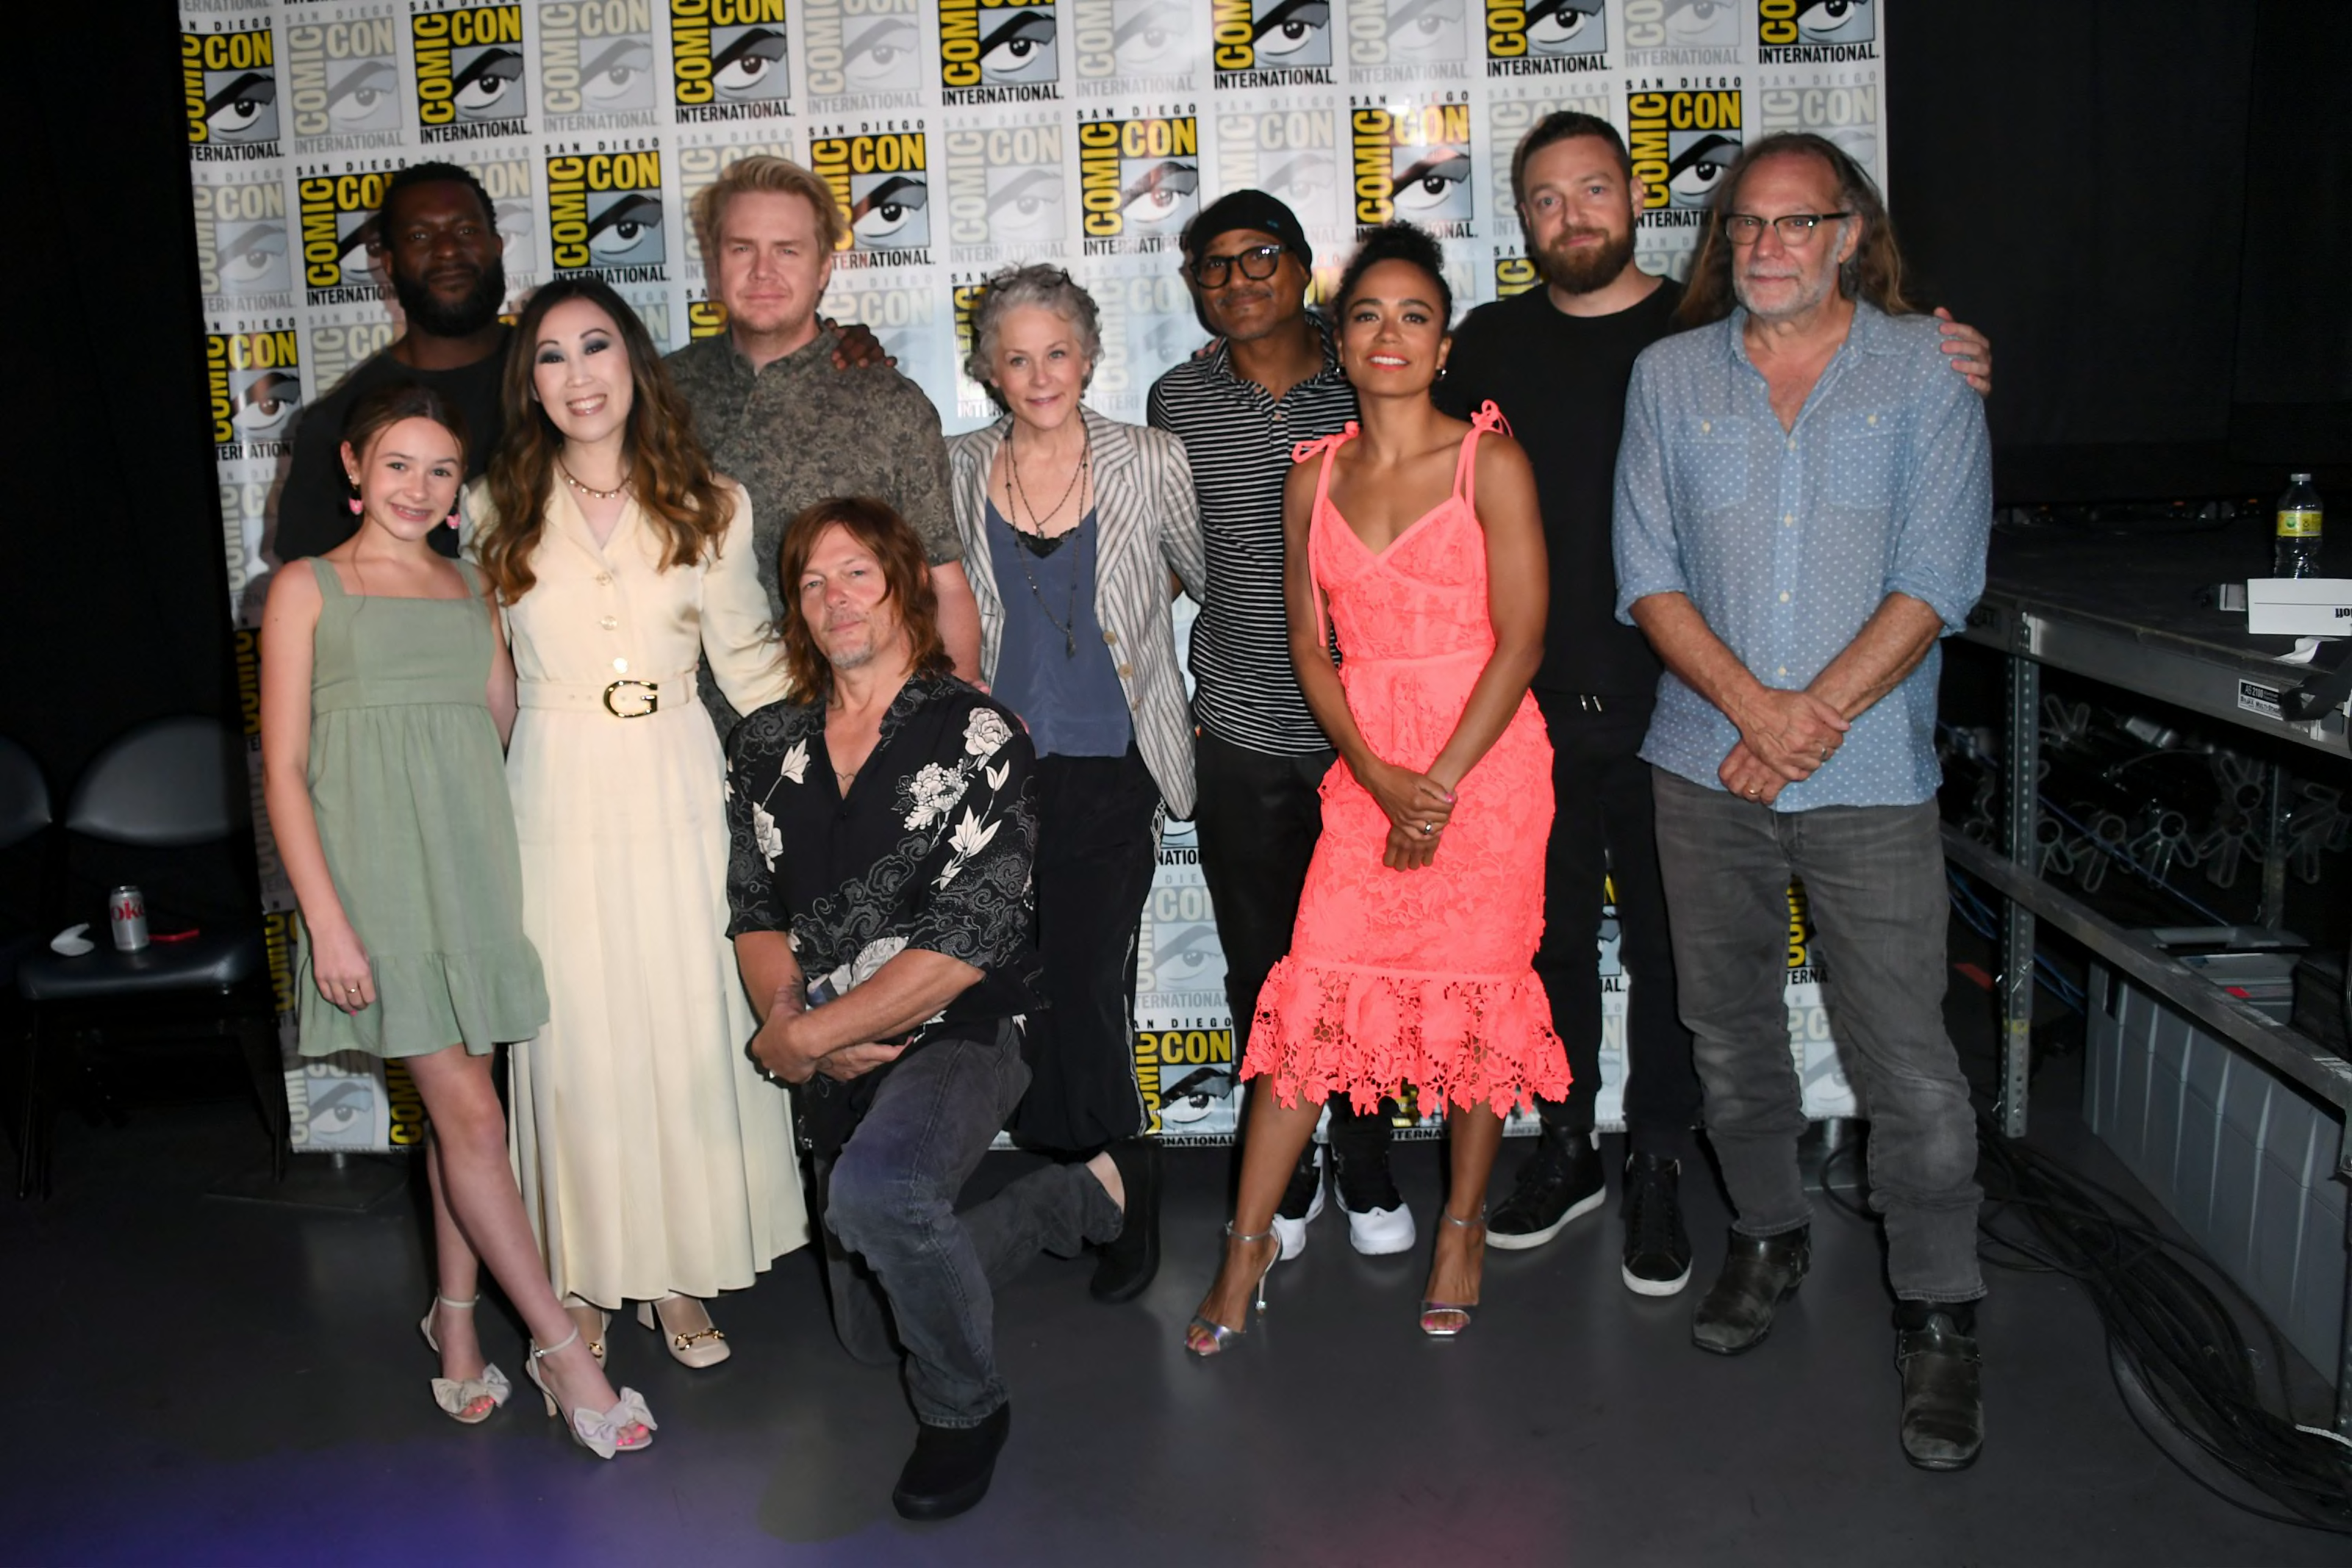 The Walking Dead cast reacts to Comic Con 2022